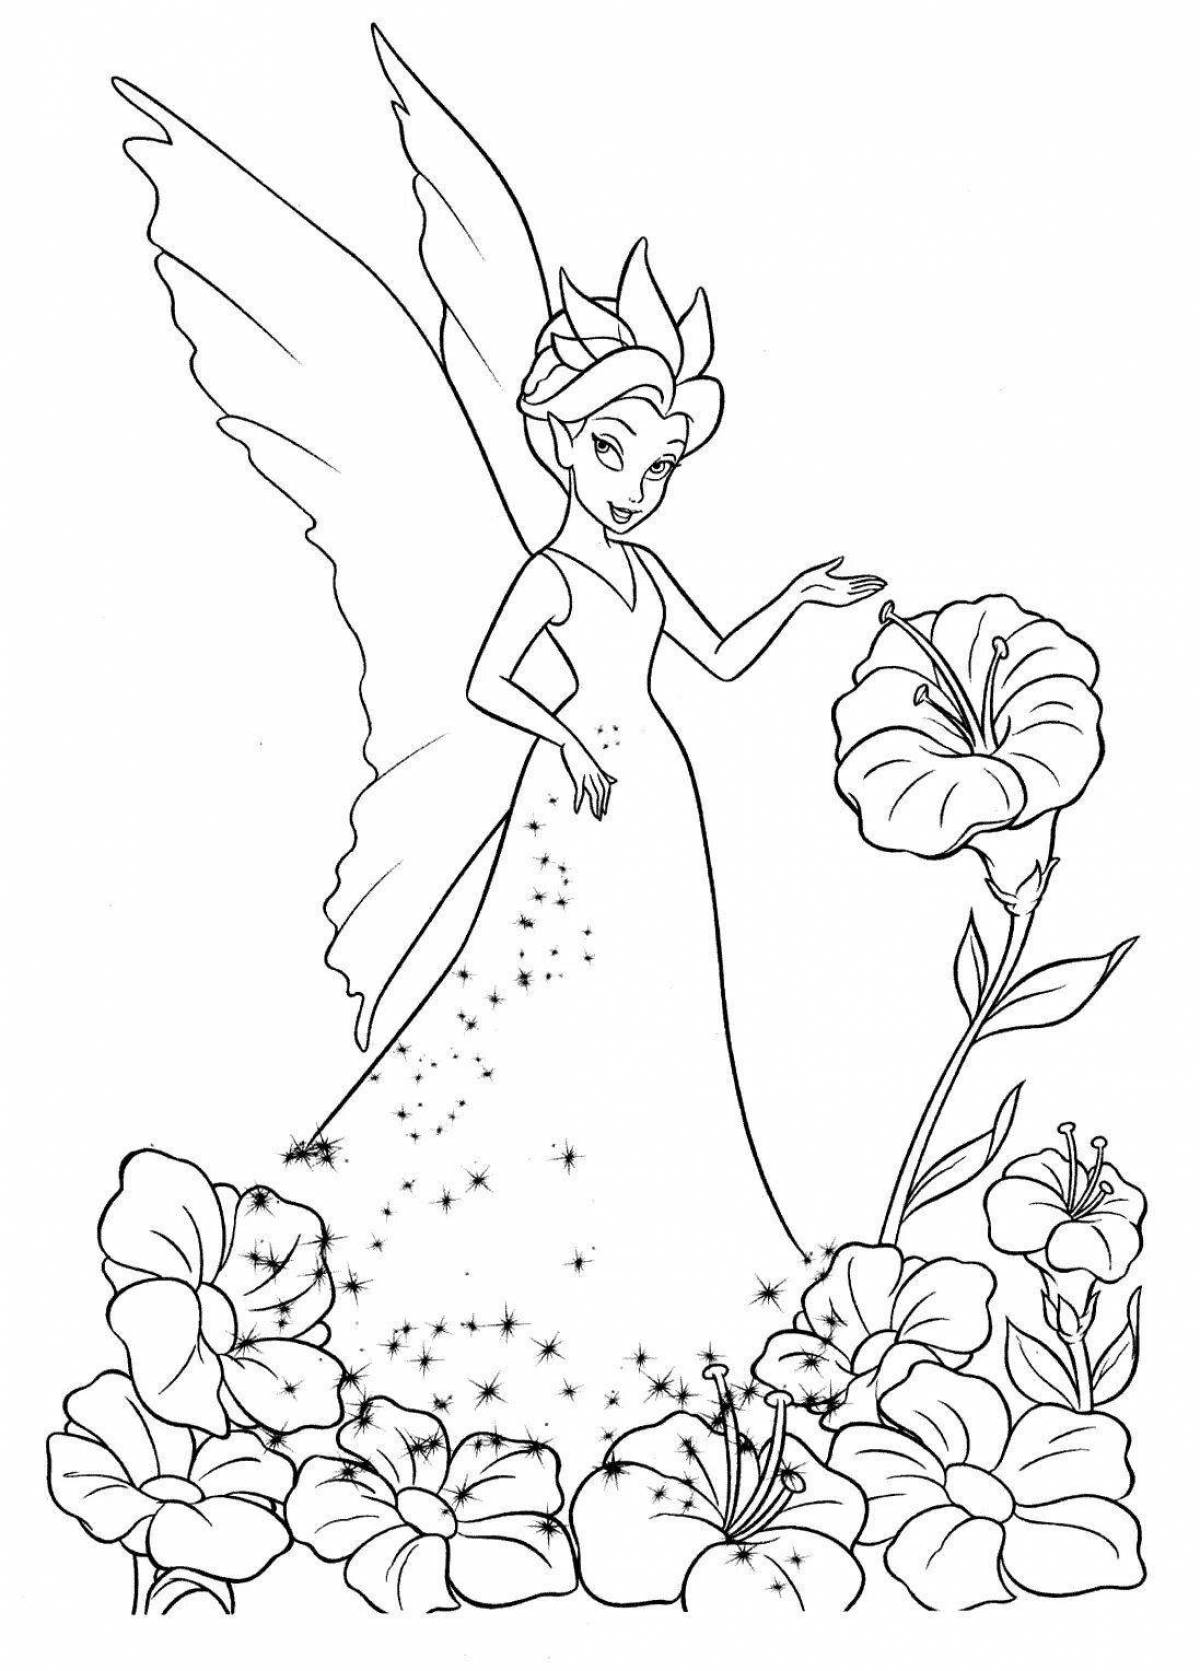 Coloring book fluttering fairies for children 5-6 years old